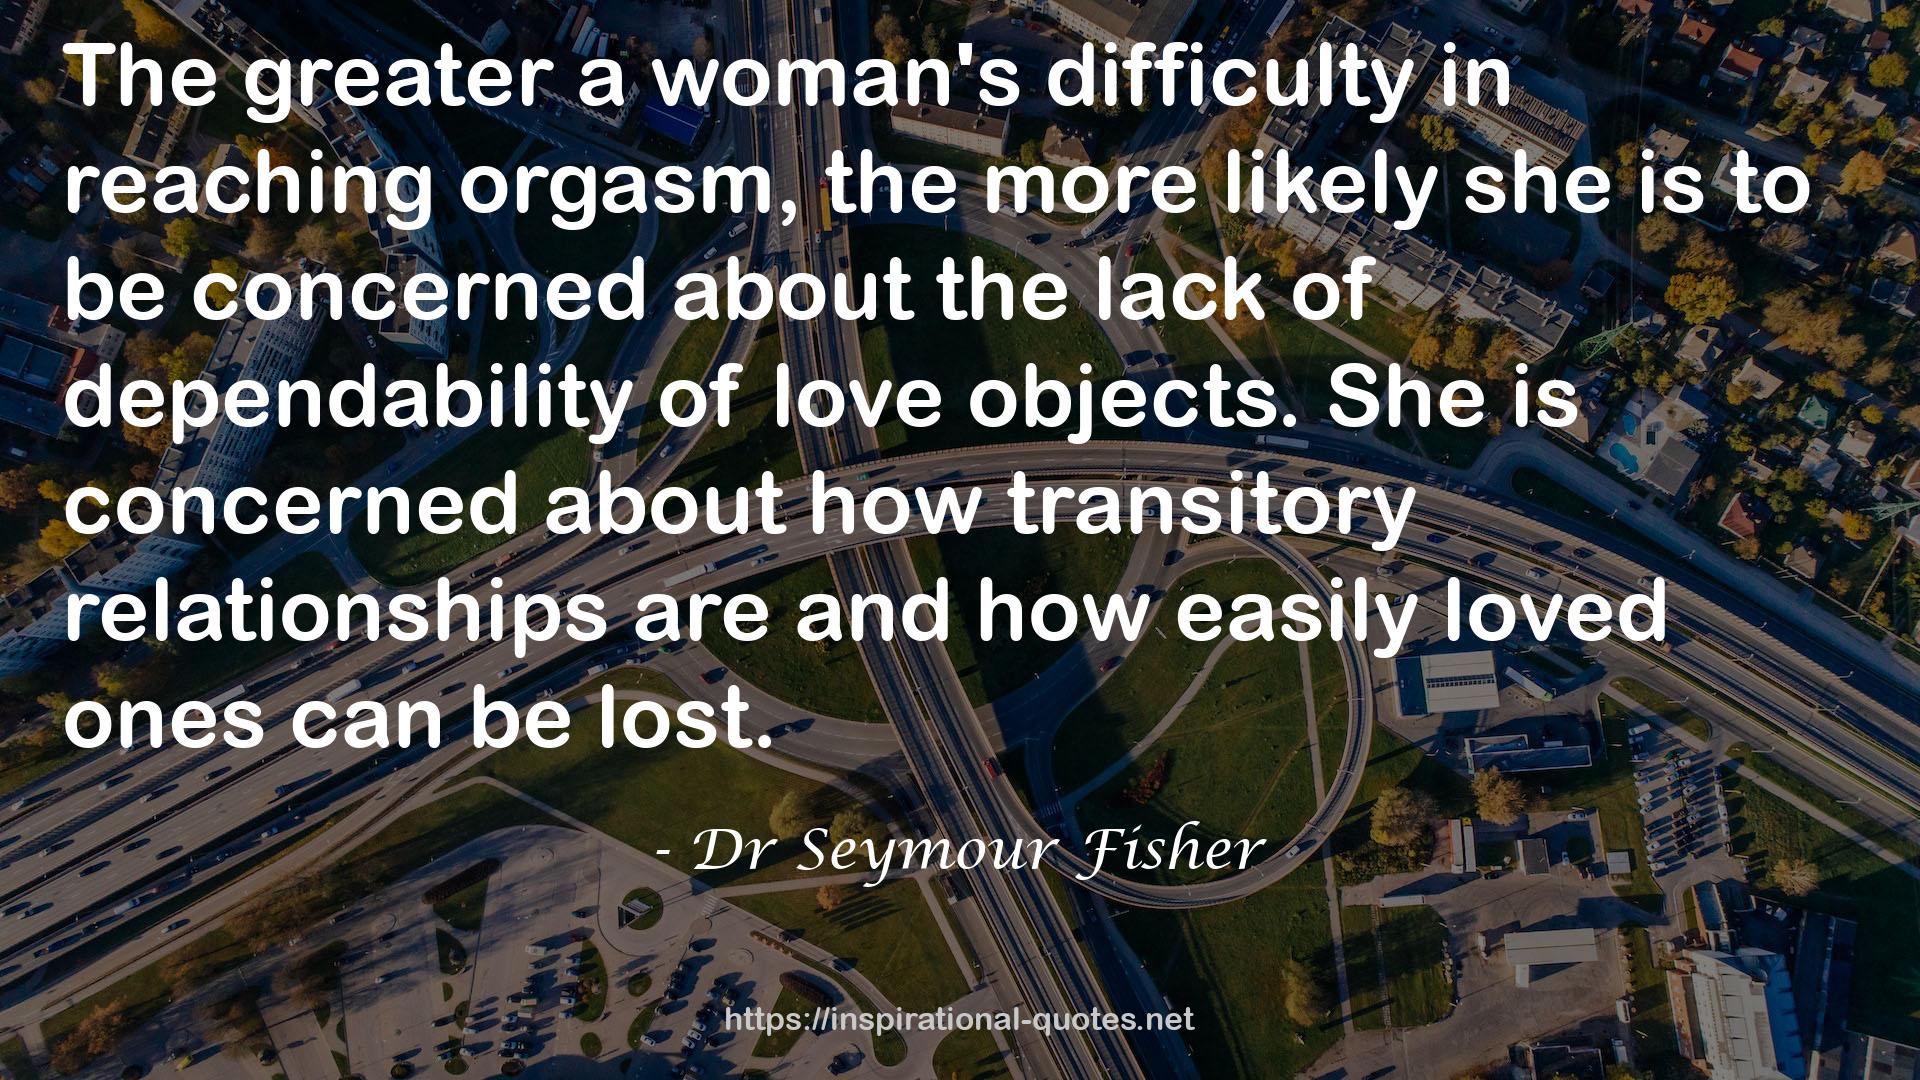 Dr Seymour Fisher QUOTES